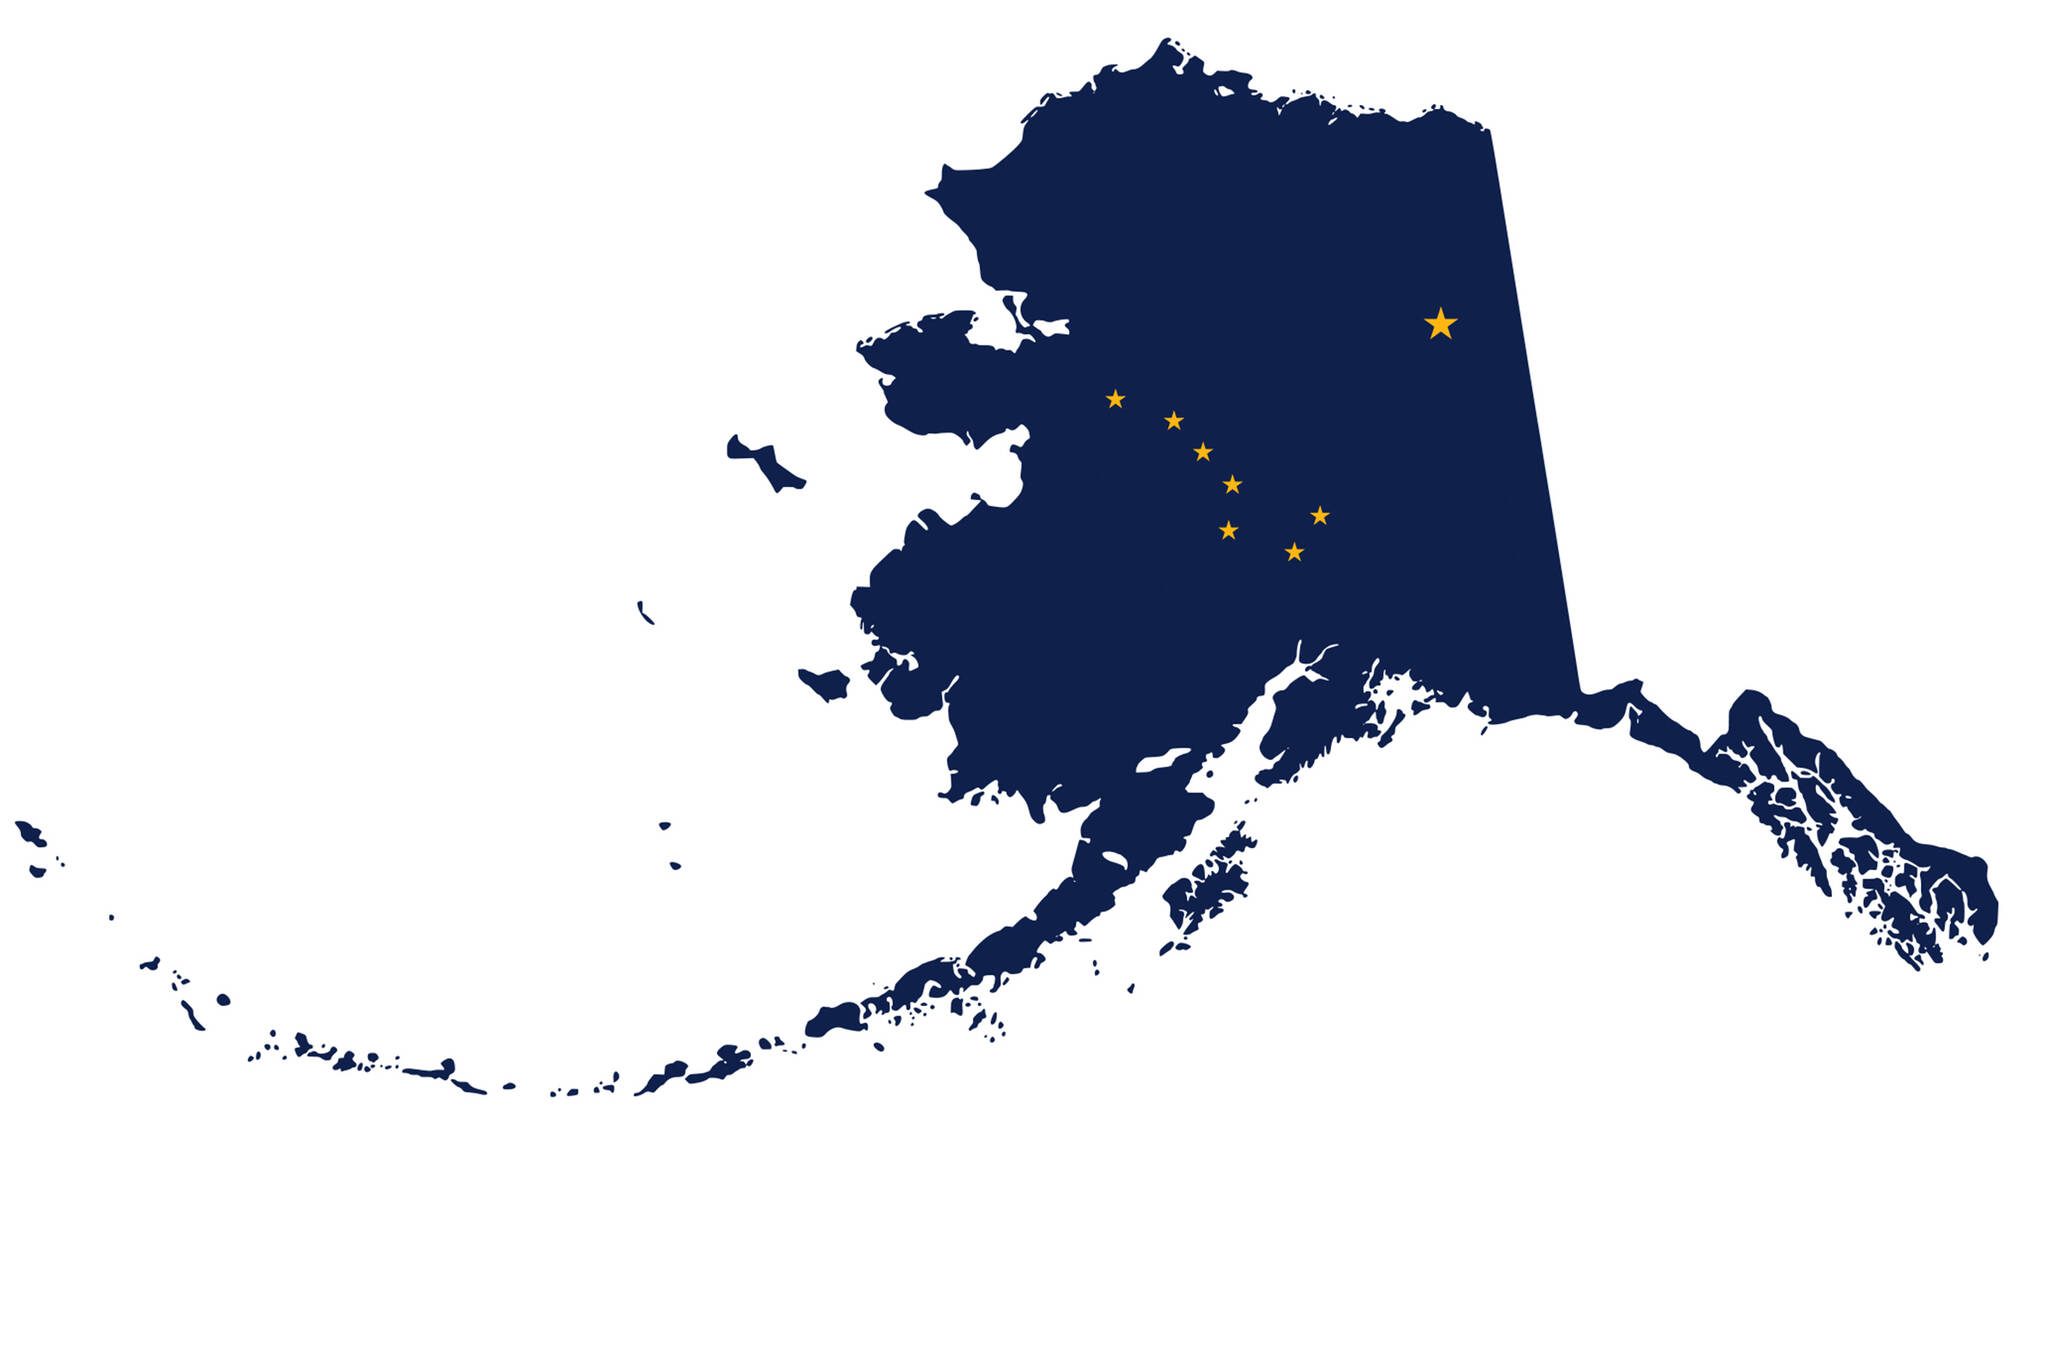 This image available under the Creative Commons license shows the outline of the state of Alaska filled with the pattern of the state flag.